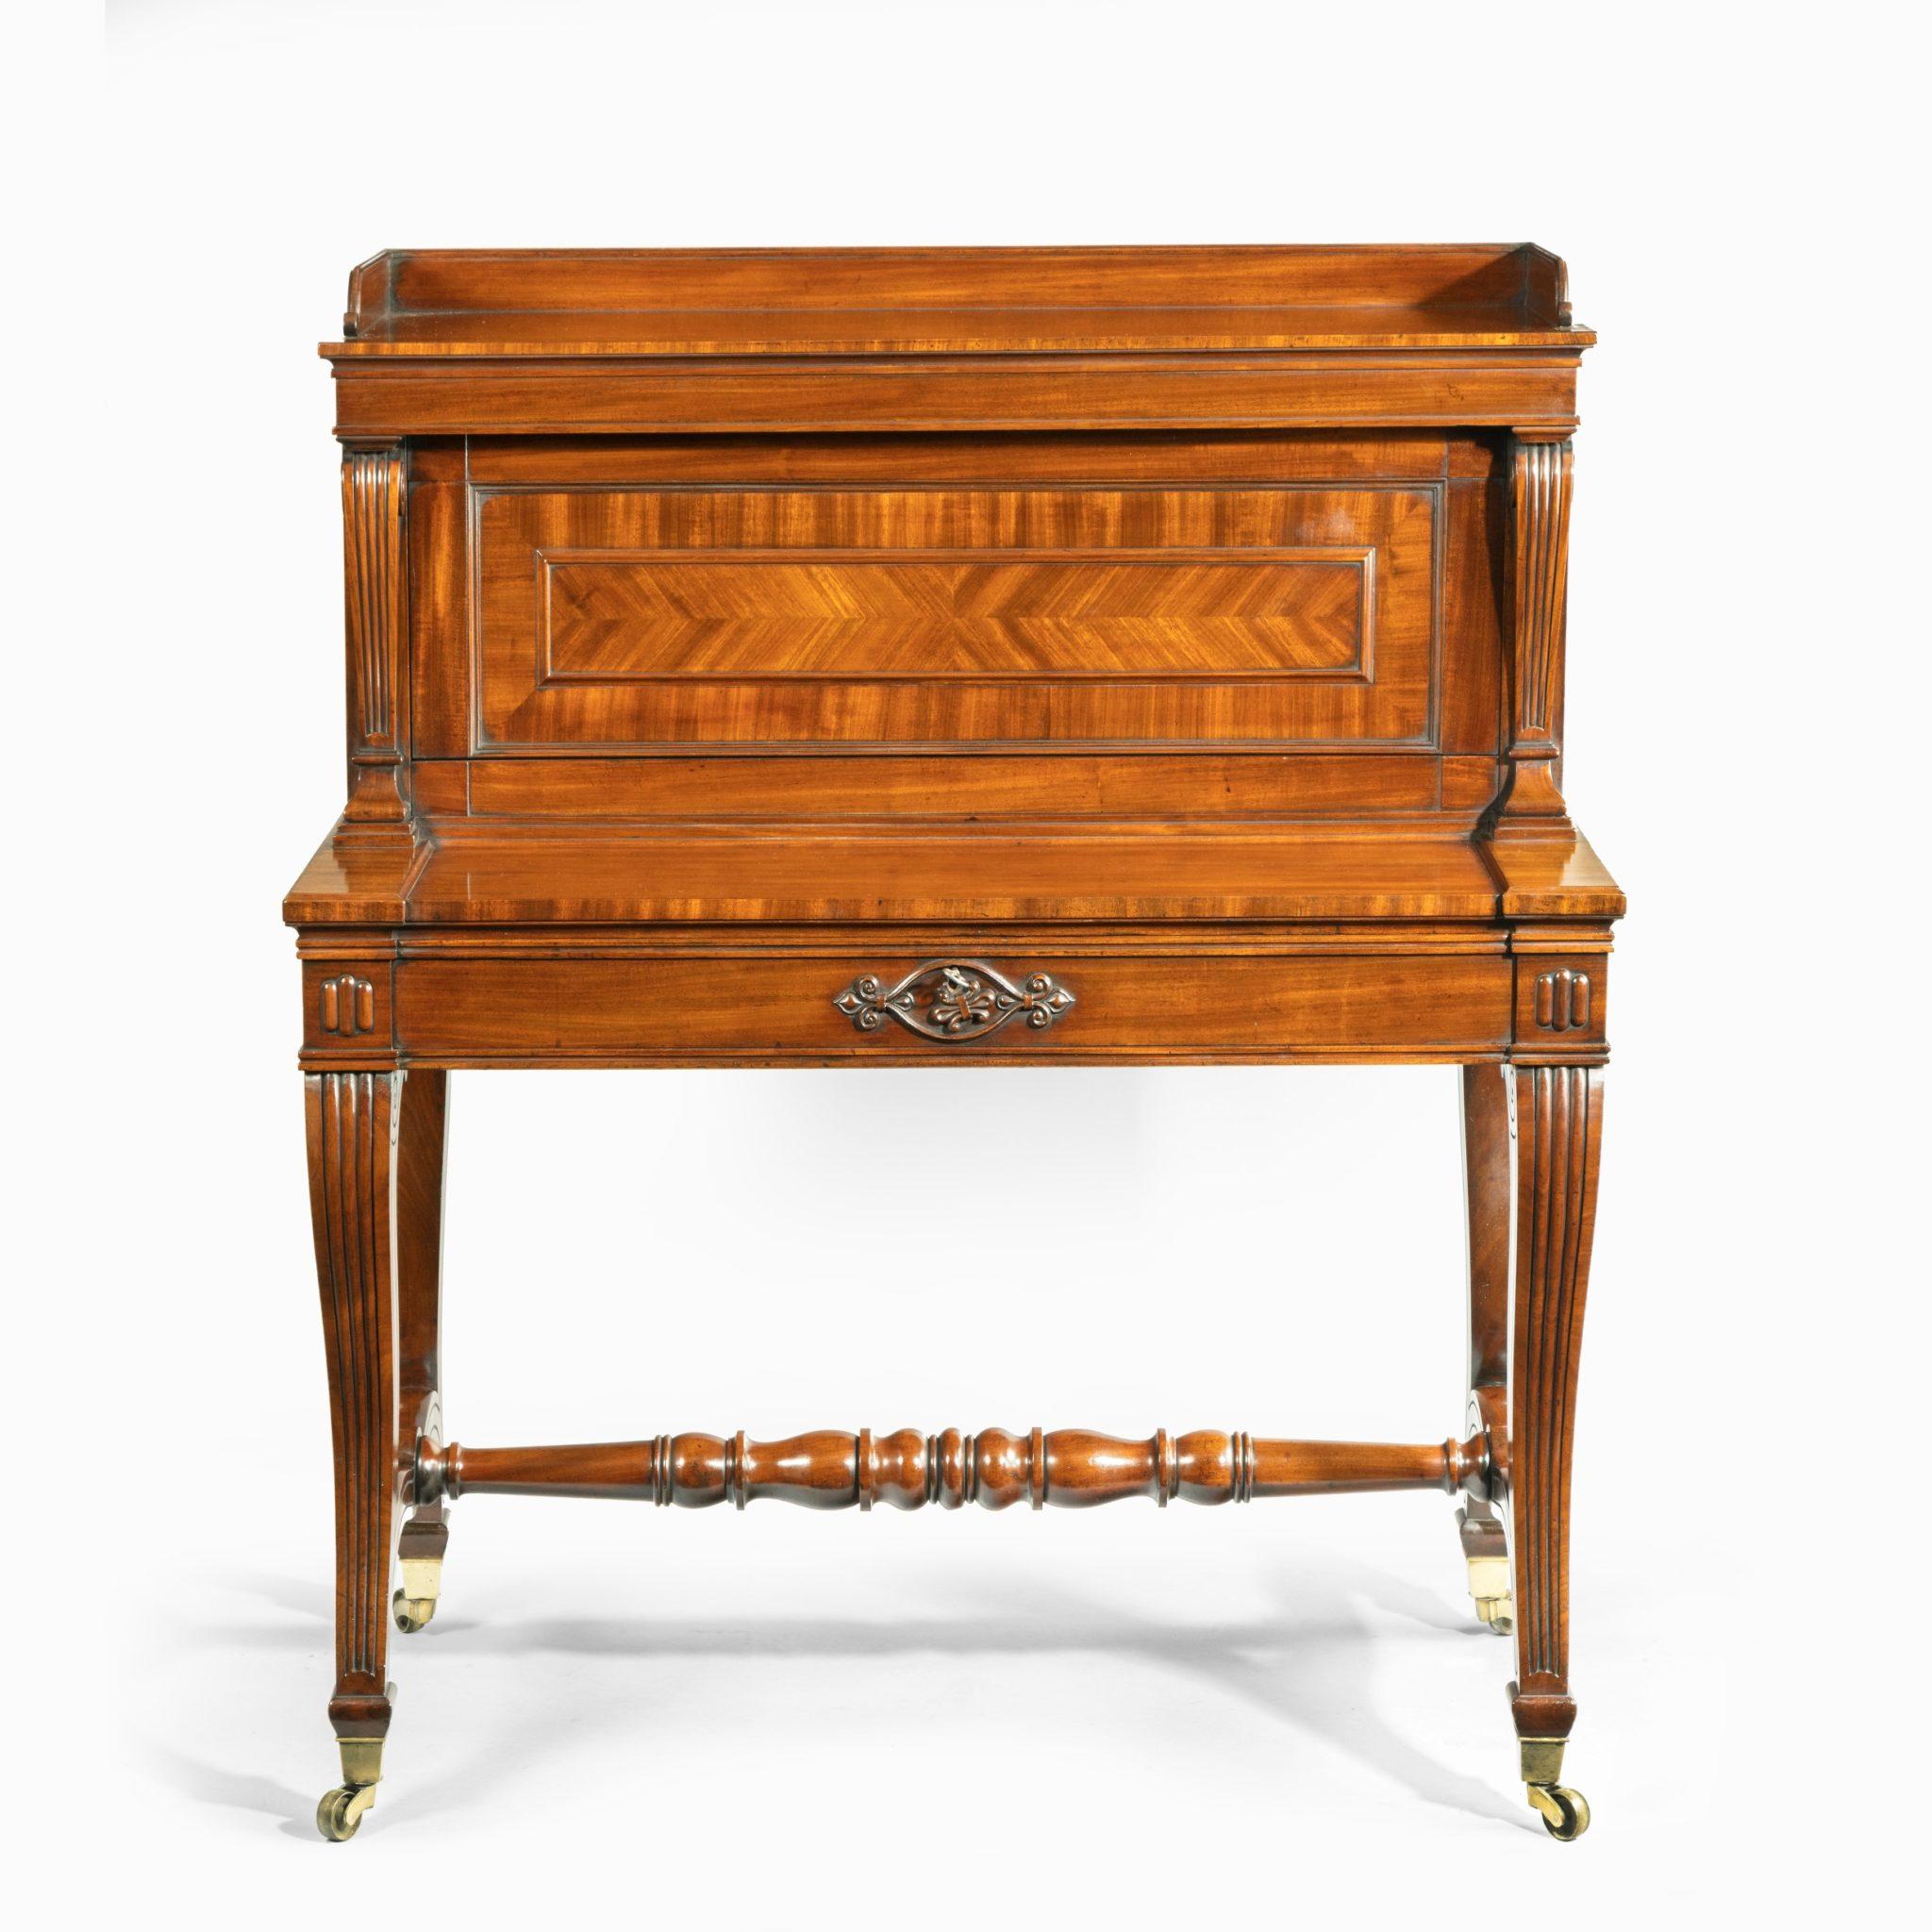 A George IV mahogany mechanical escritoire attributed to Gillows, of rectangular form with a vertical superstructure on reeded cabriole legs with a turned stretcher and the original brass castors, pulling out the frieze drawer triggers a mechanism